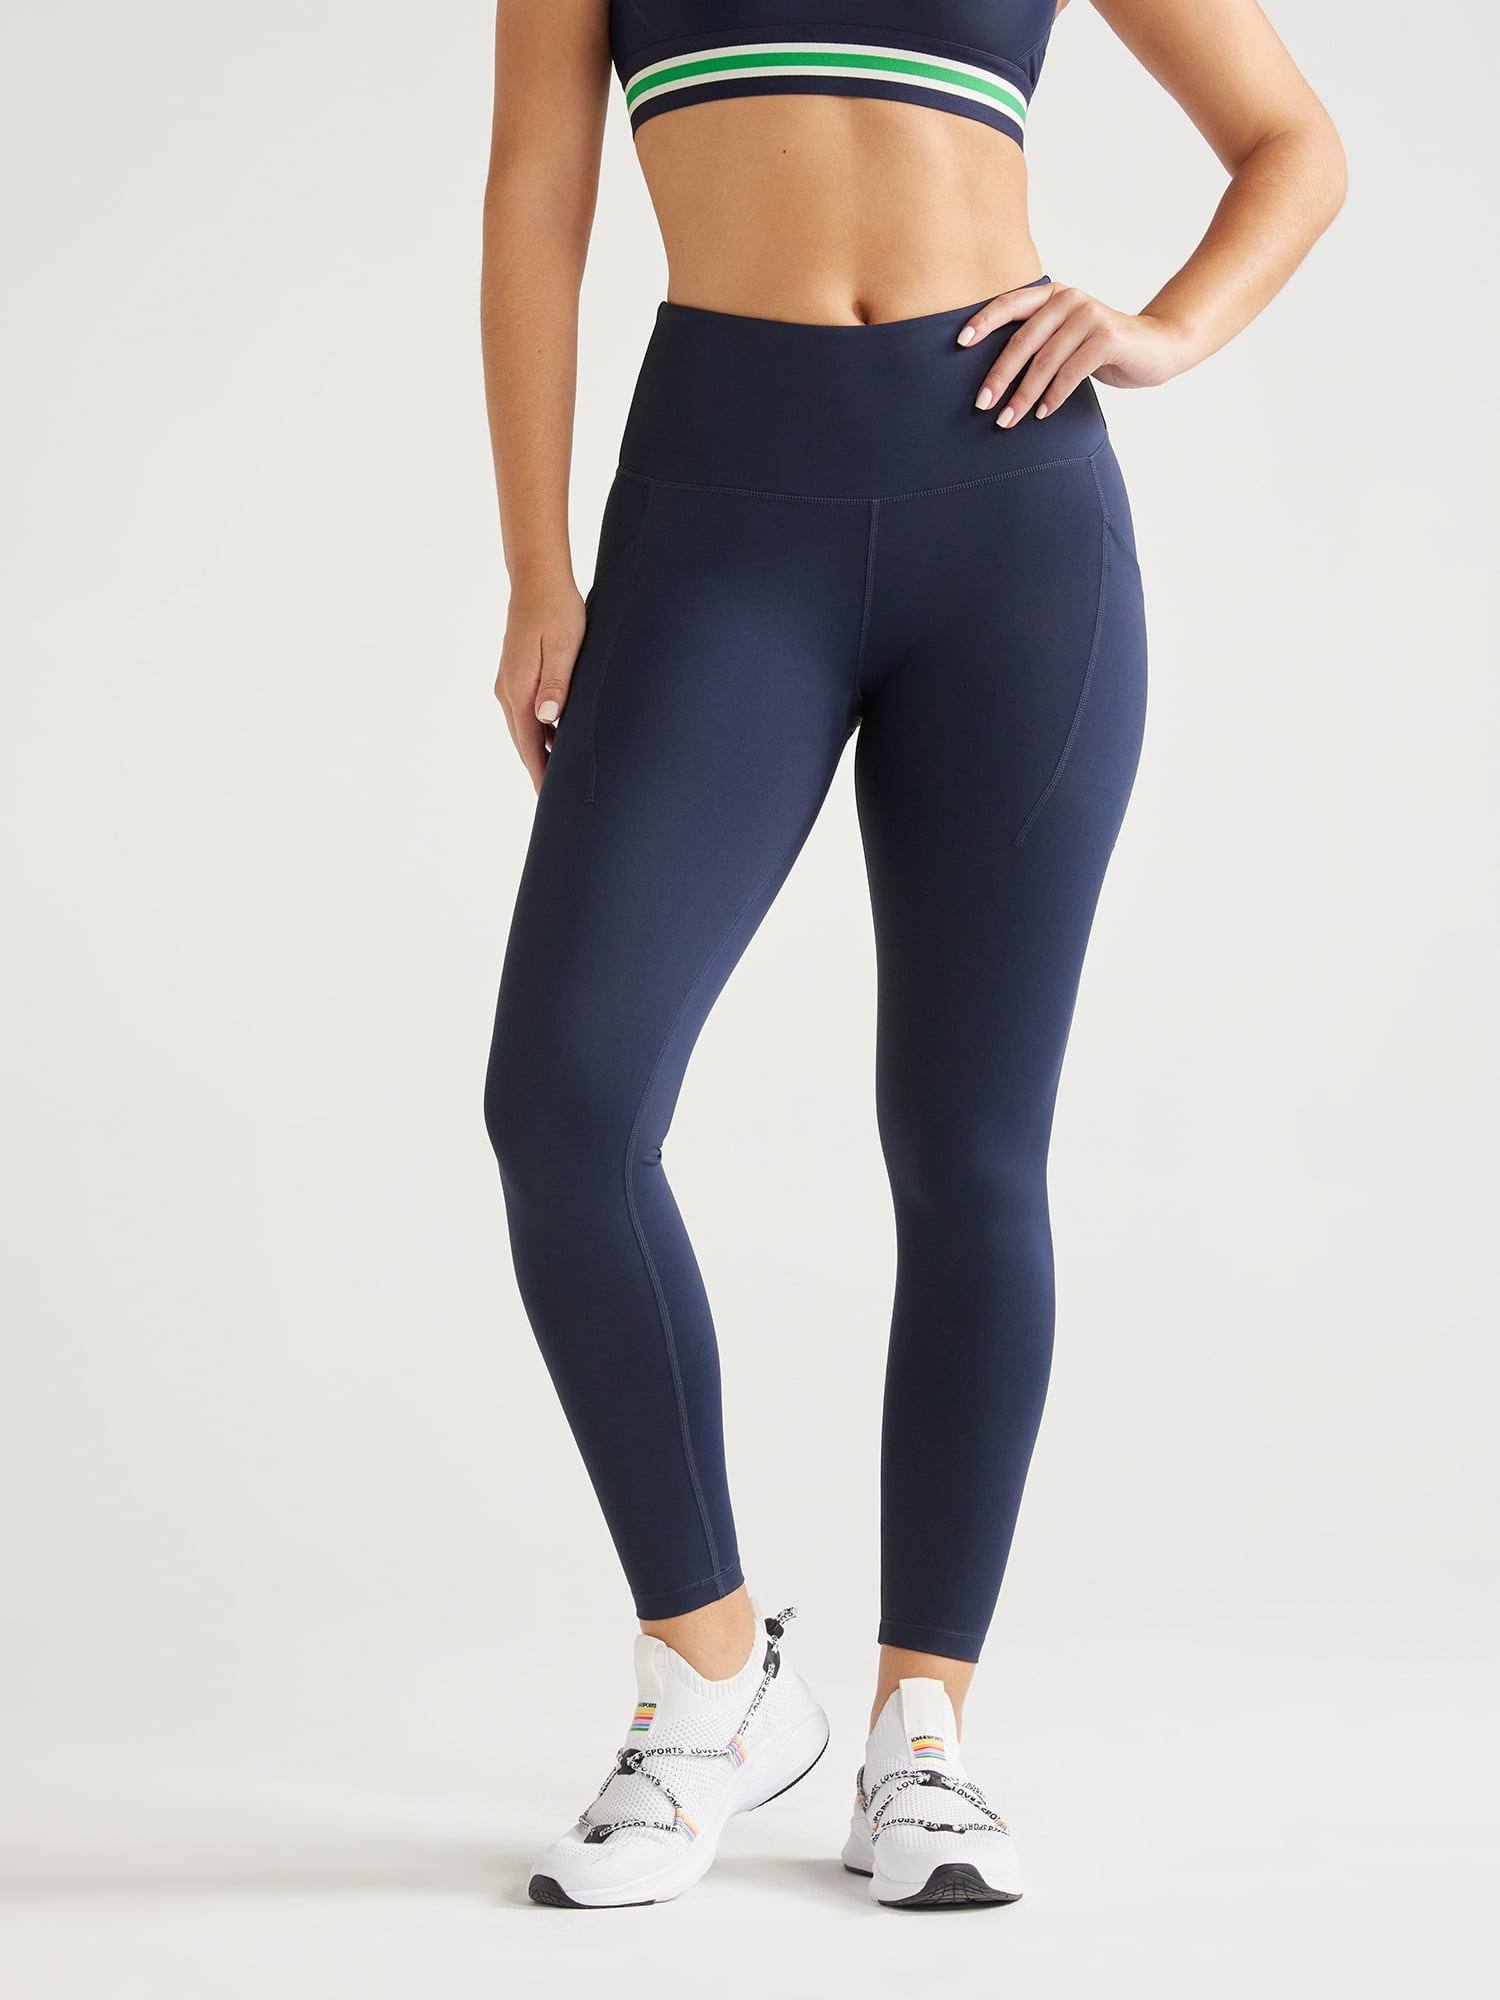 Love & Sports Women's Performance Leggings with Side Pockets, 25